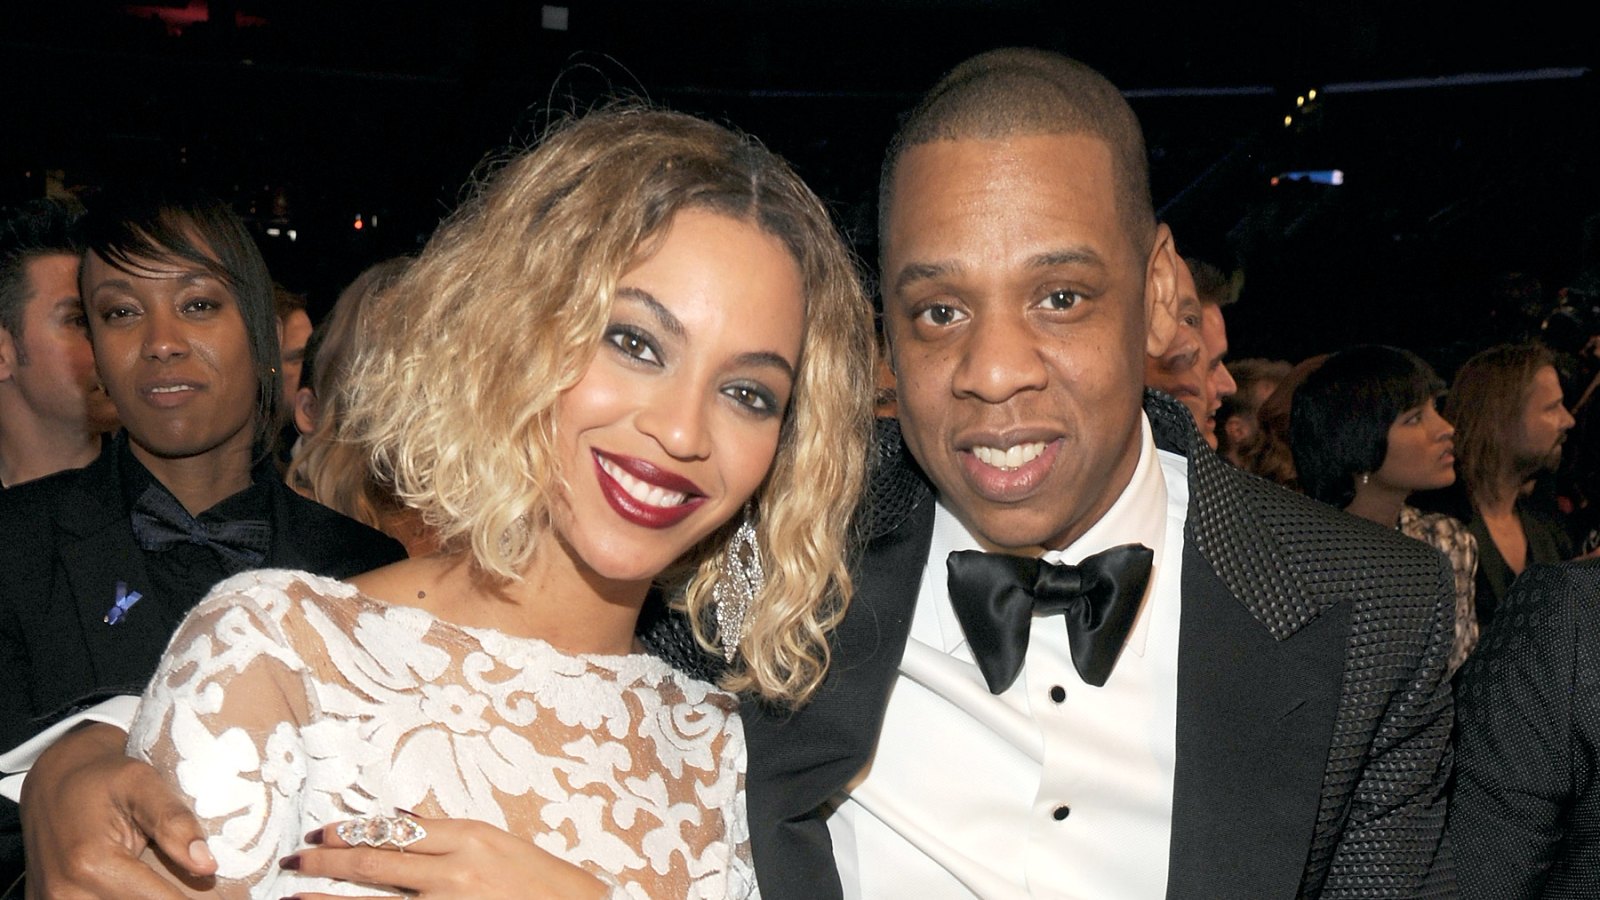 Beyonce and Jay-Z at the 56th GRAMMY Awards on Jan. 26, 2014